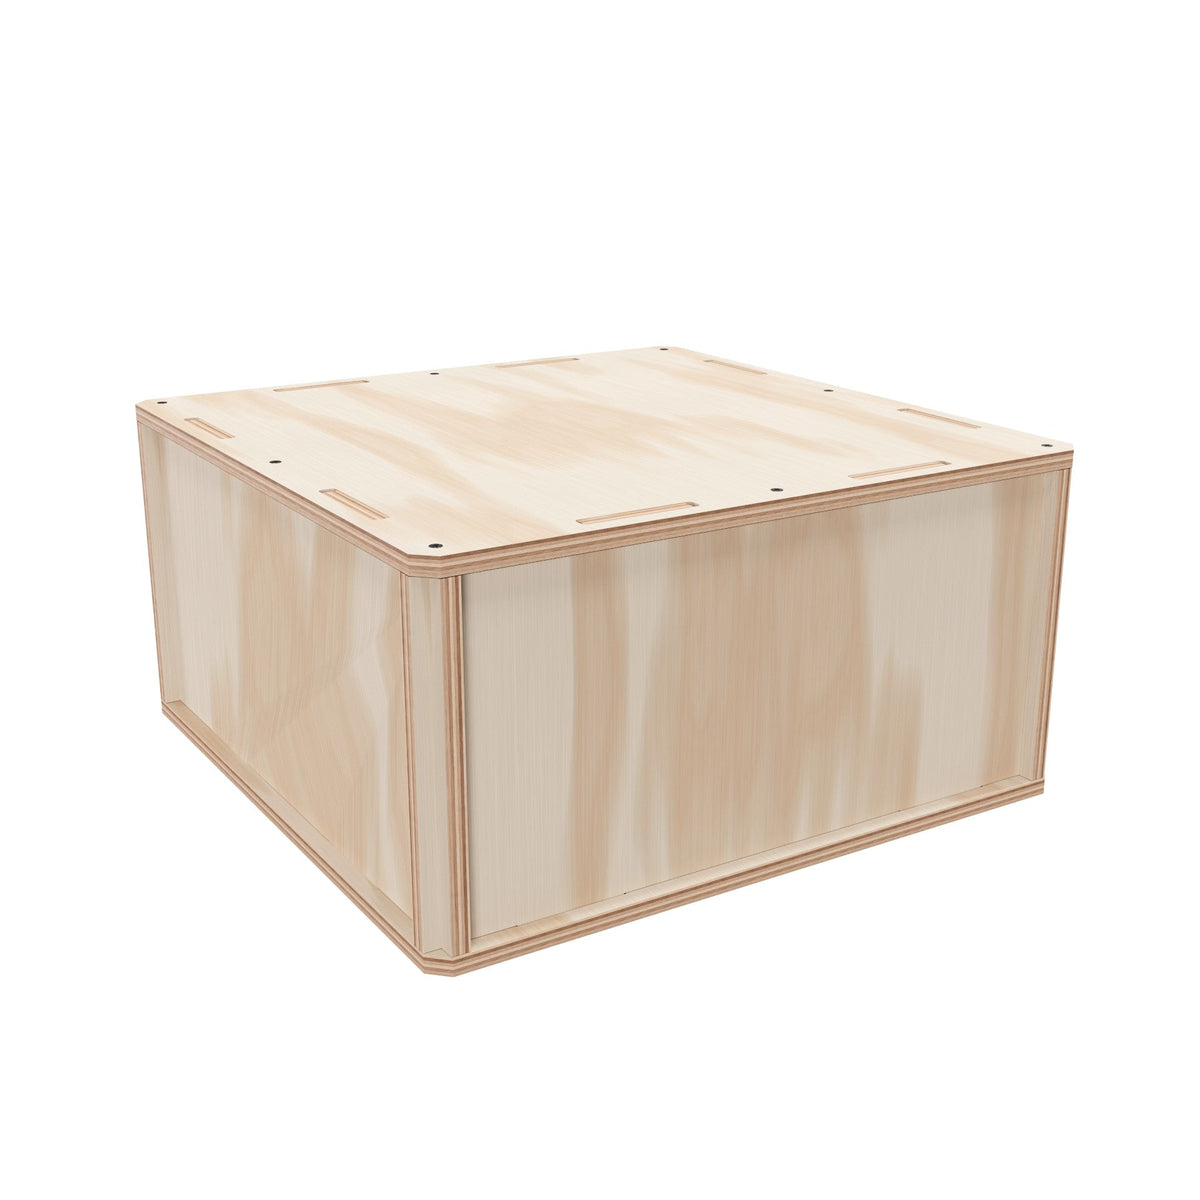 Plywood Shipping Crate 20x10x10